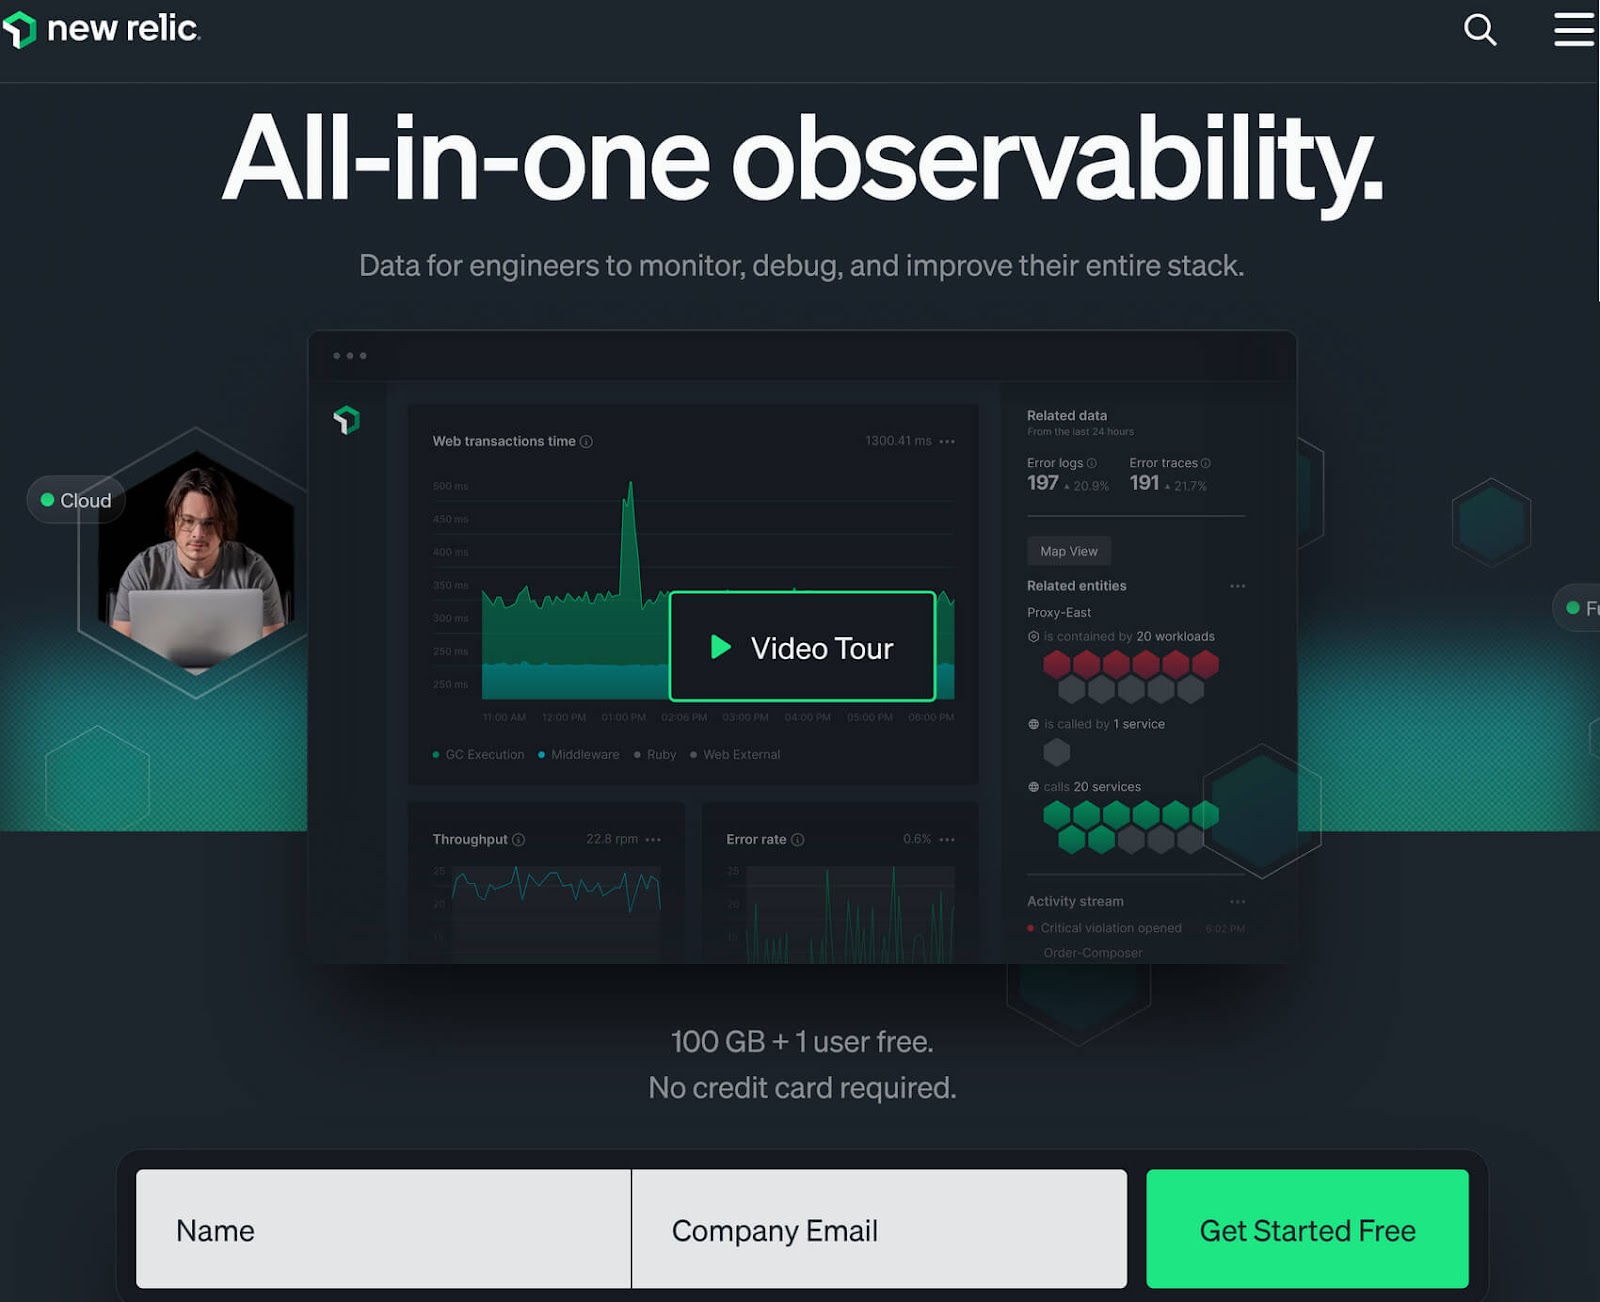 New Relic website promoting "All-in-one observability" with a "Get Started Free" button in the lower right.